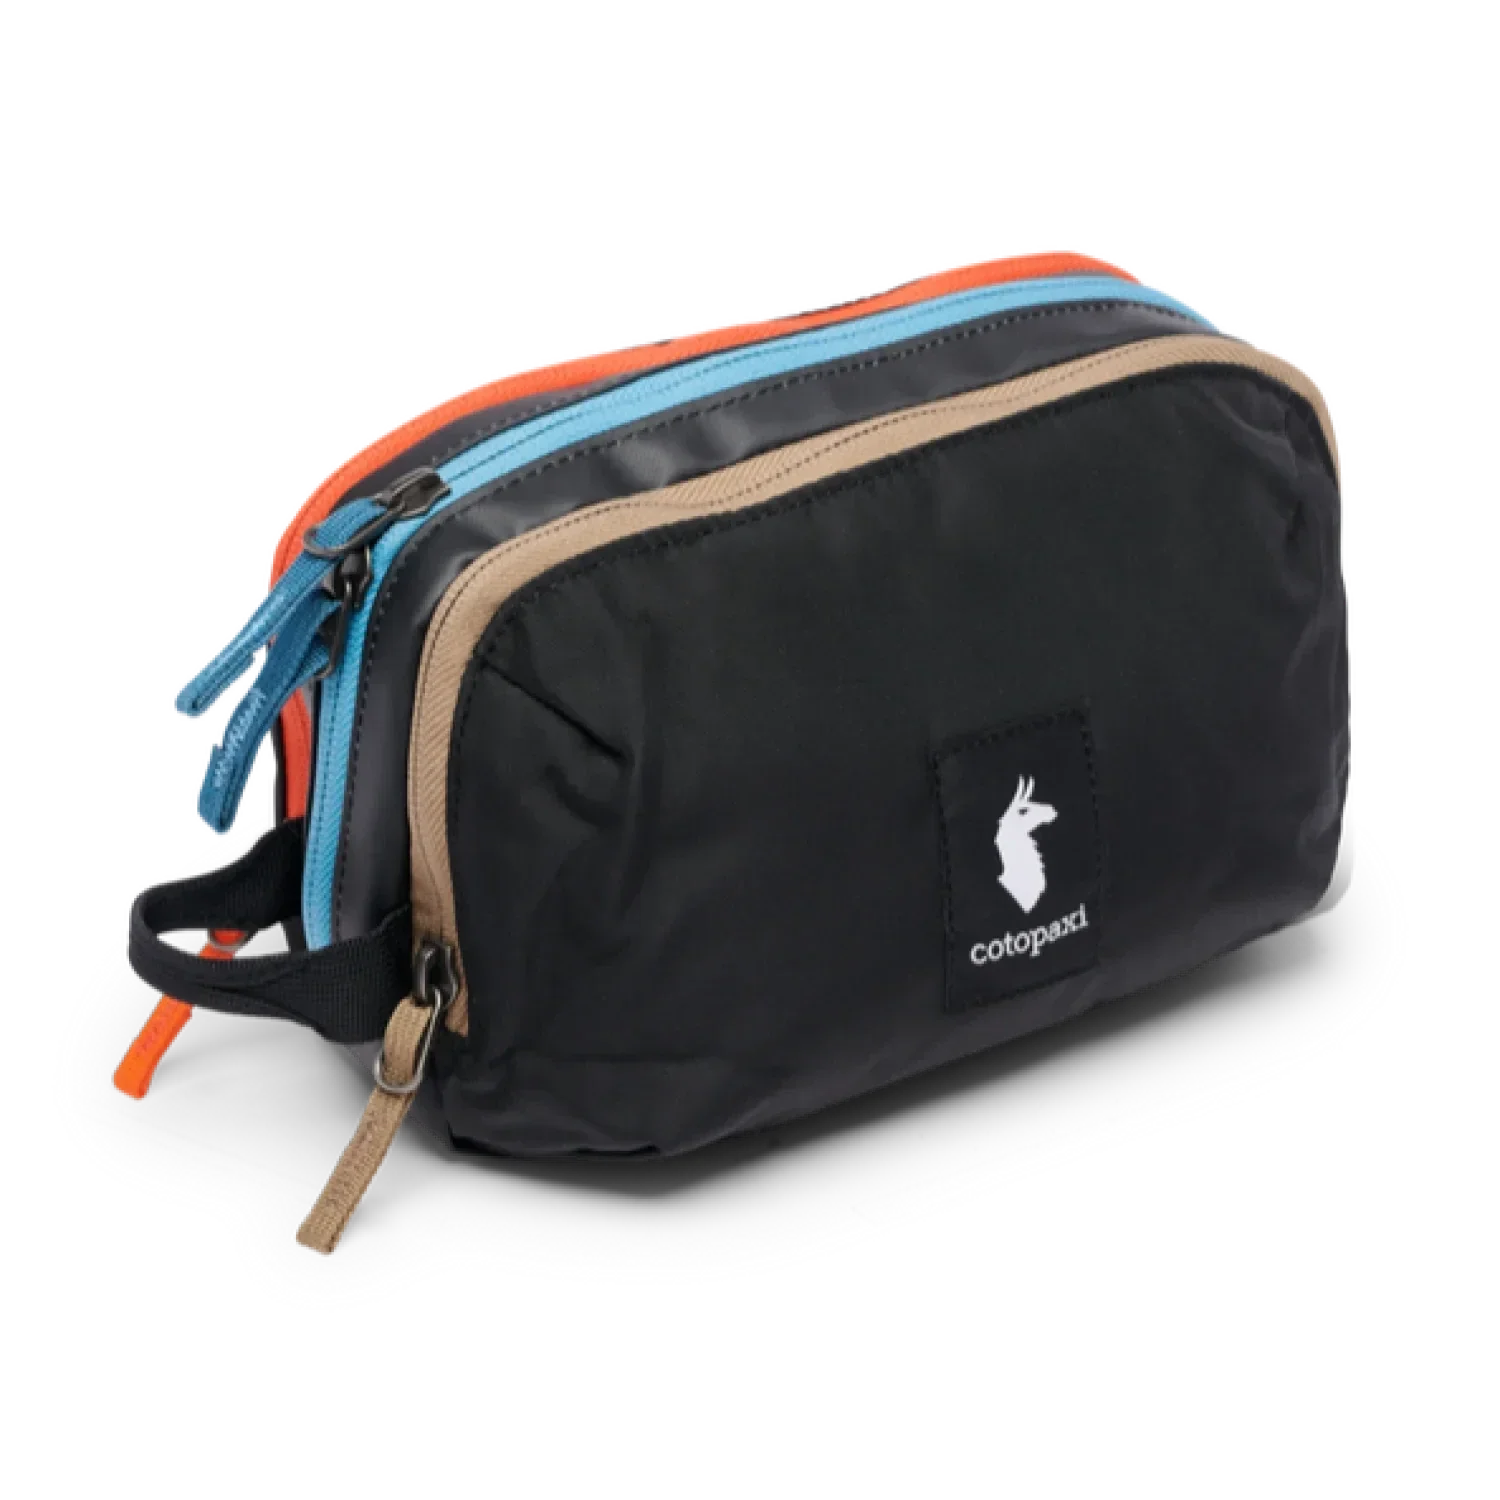 Cotopaxi PACKS|LUGGAGE - PACK|CASUAL - WAIST|SLING|MESSENGER|PURSE Nido Accessory Bag DEL DIA